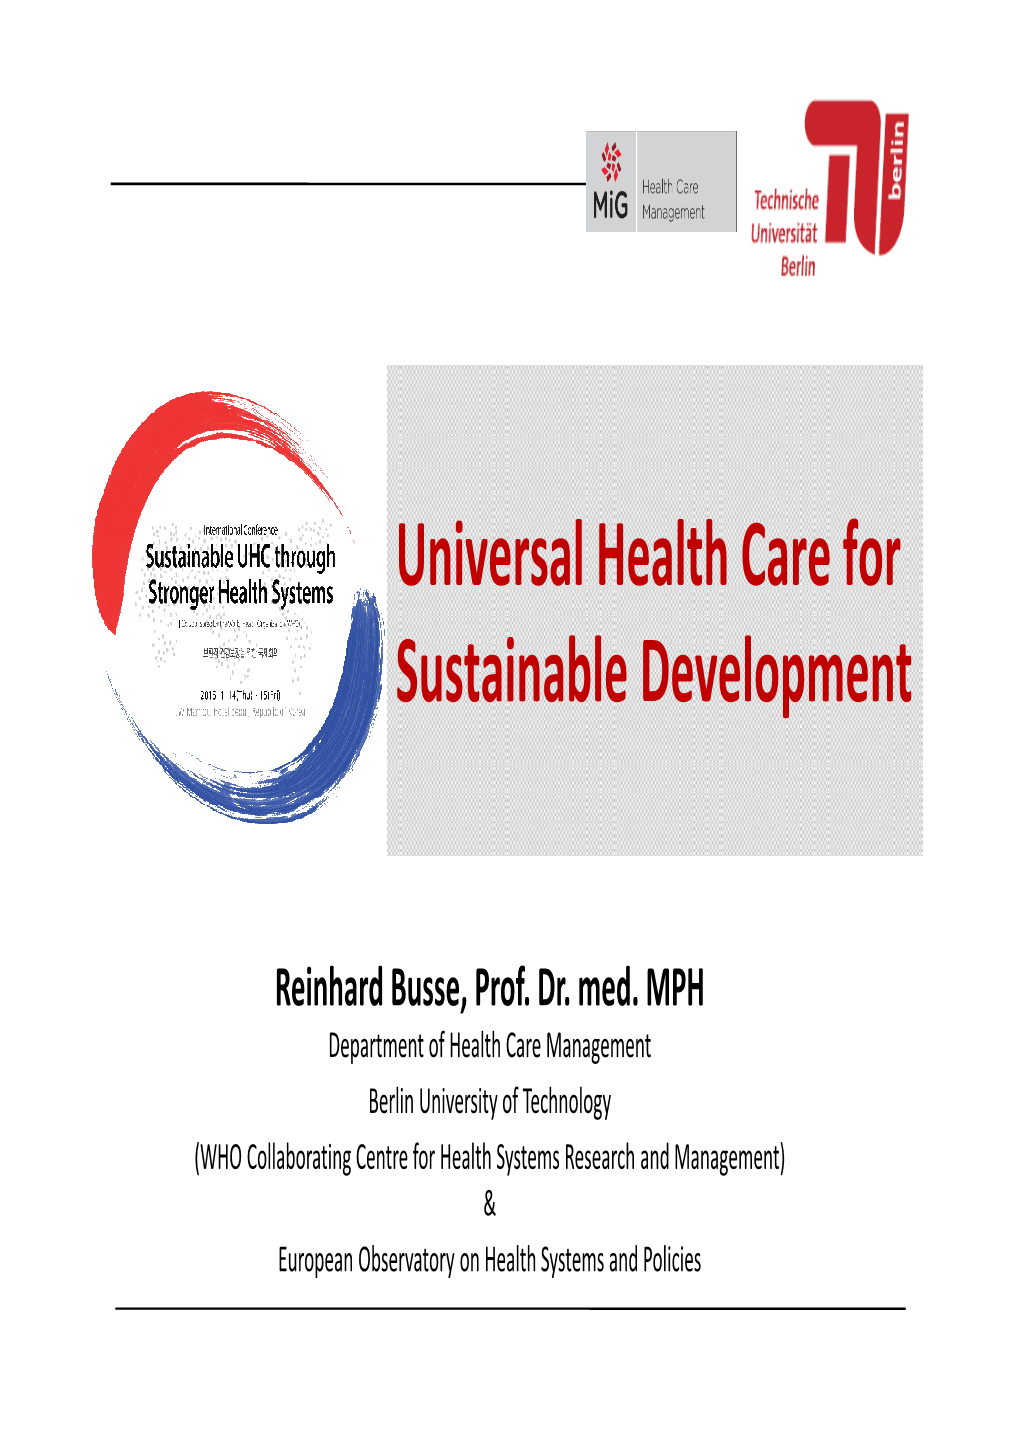 Universal Health Care for Sustainable Development